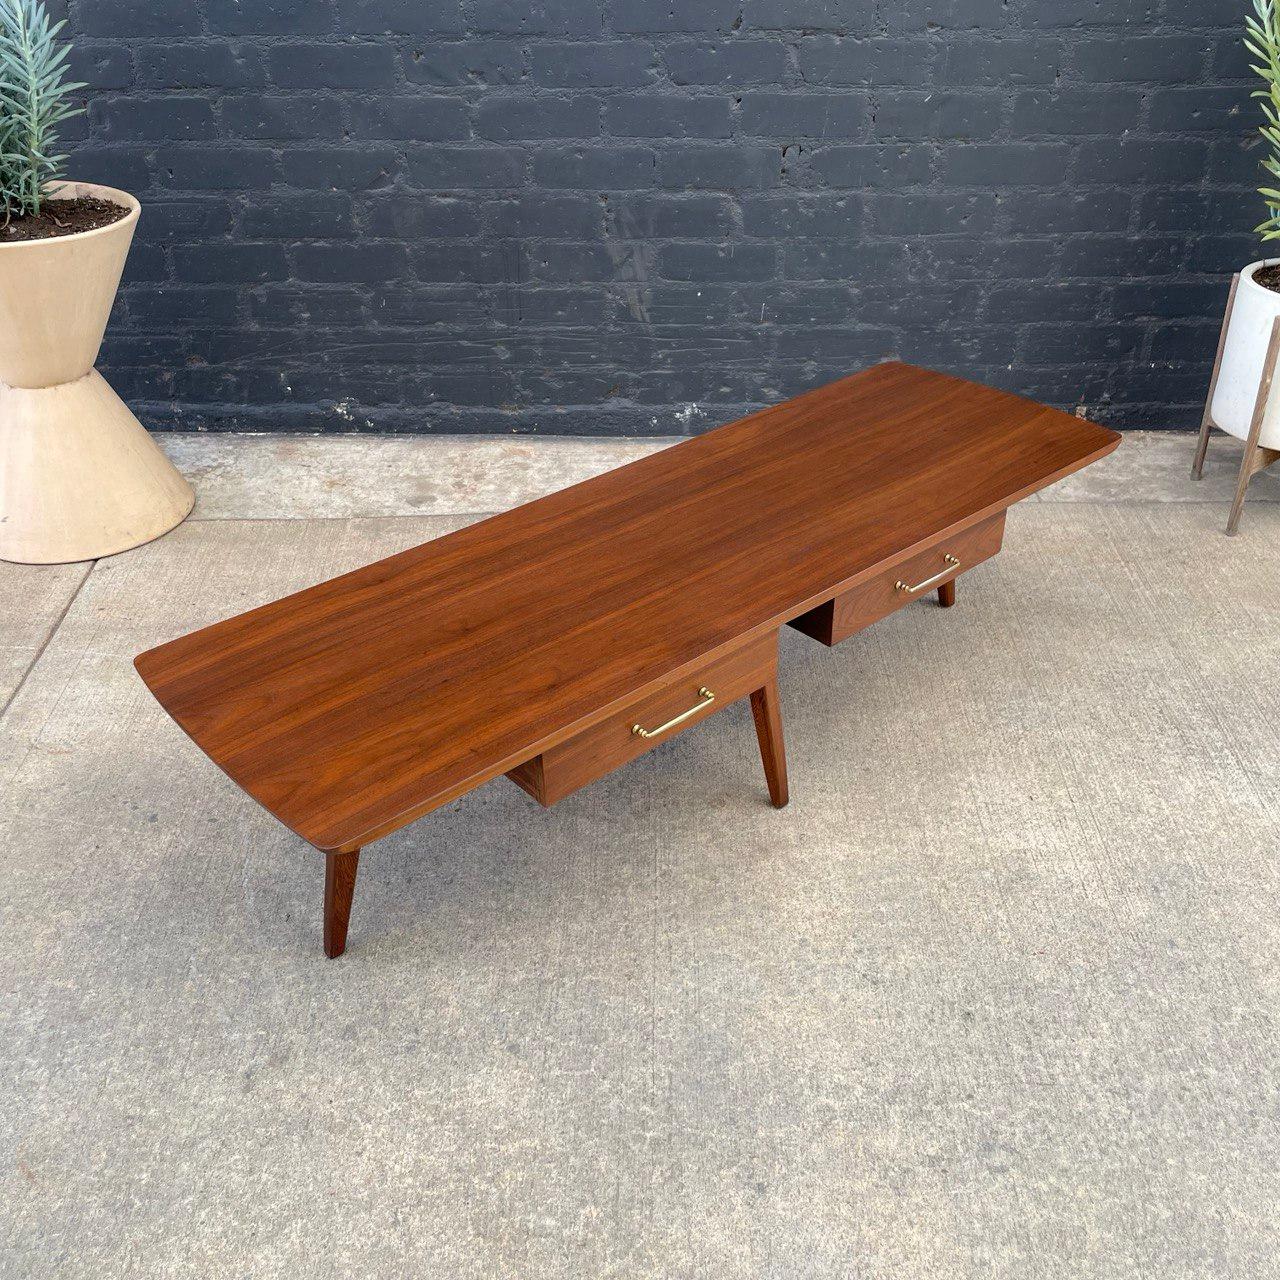 American Newly Refinished - Vintage Mid-Century Modern Walnut Coffee Table For Sale